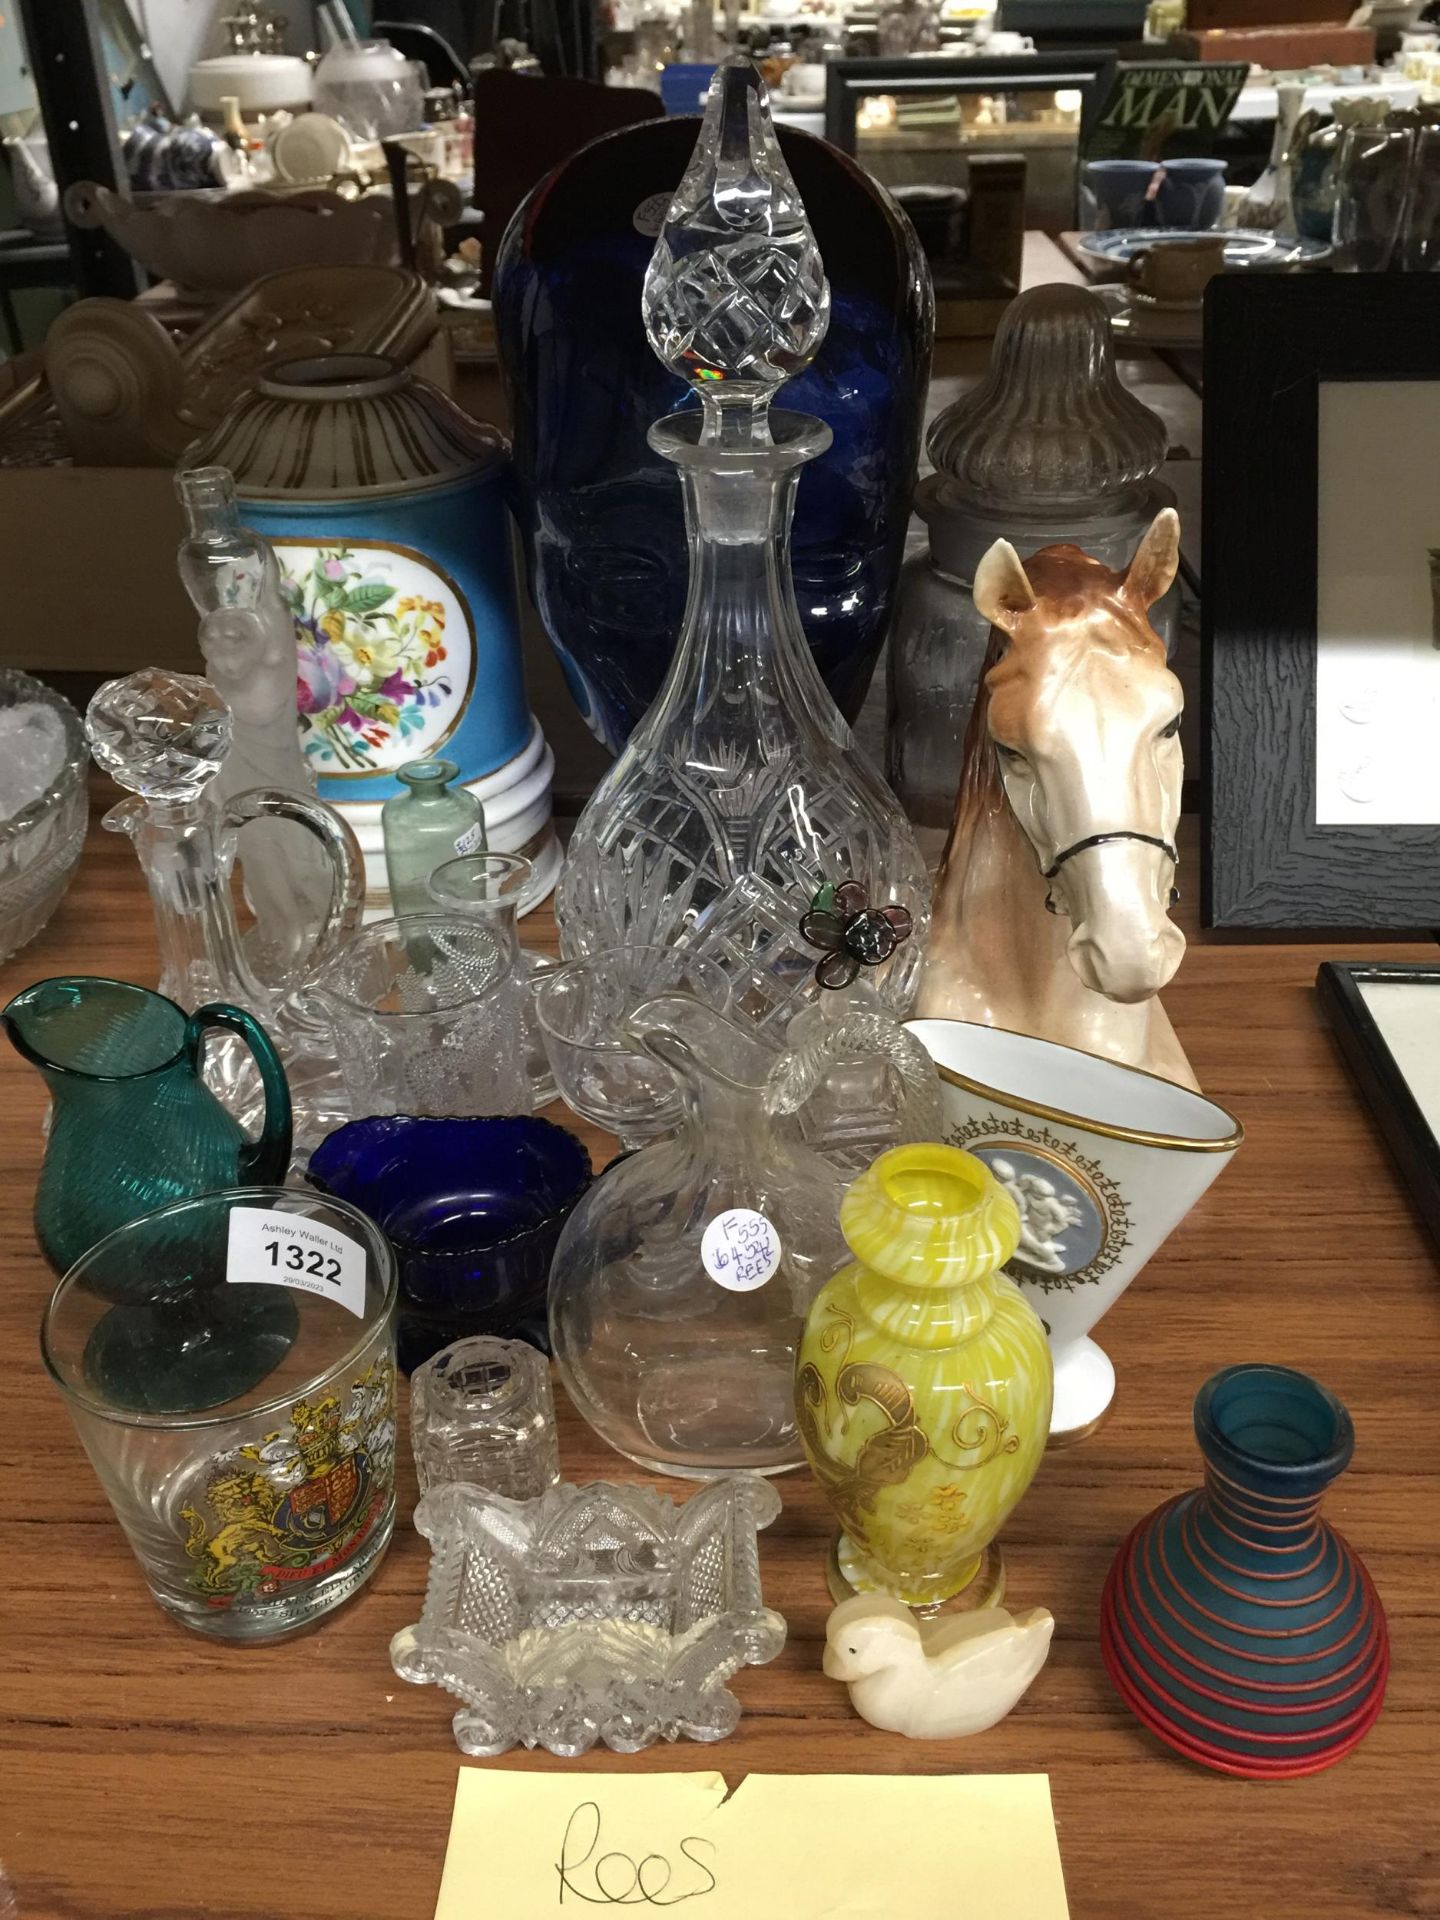 A MIXED LOT TO INCLUDE A LARGE BLUE GLASS HEAD, A CERAMIC HORSES HEAD, A DECANTER, GLASS JUGS, SMALL